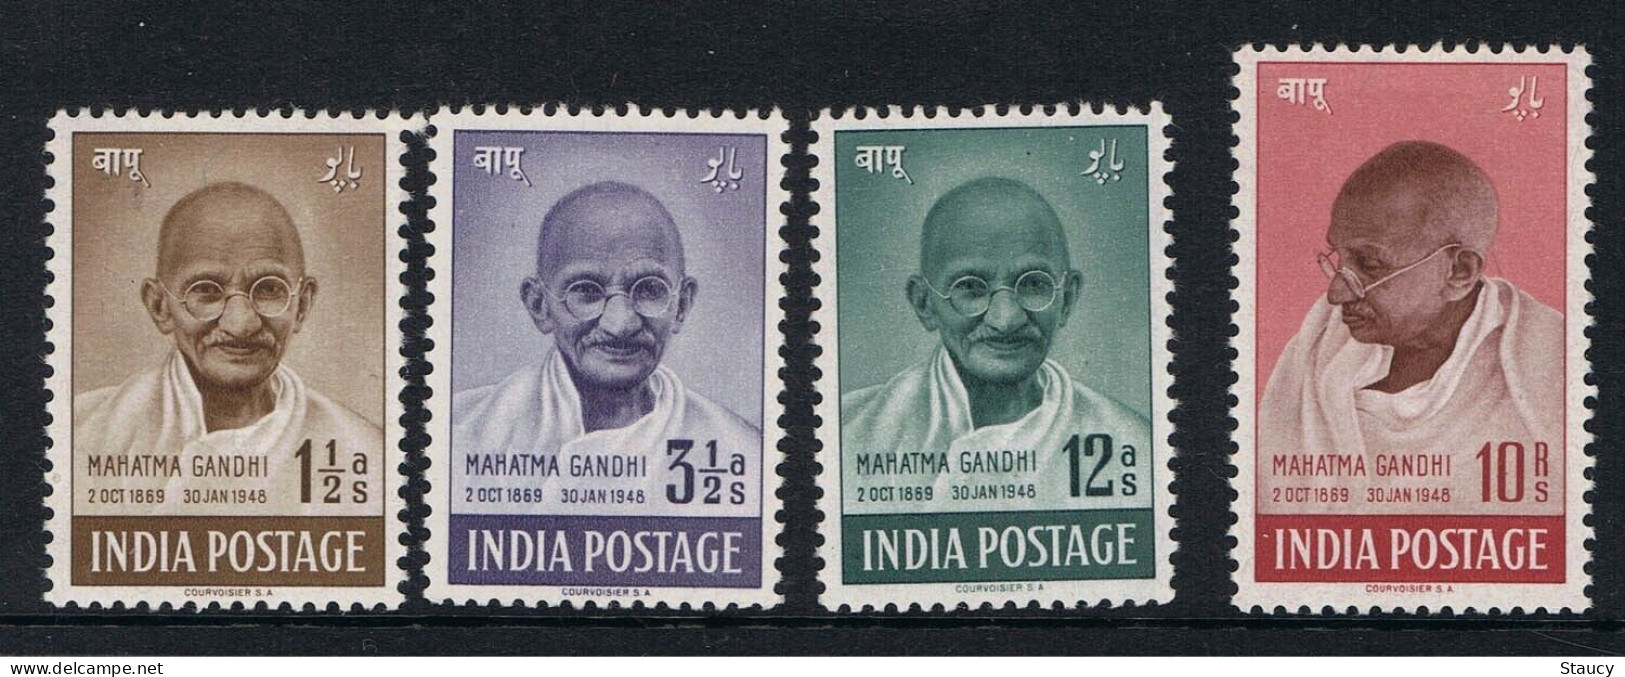 India 1948 Mahatma Gandhi Mourning 4v SET Mounted Mint Uneven Back, NICE COLOUR As Per Scan - Unused Stamps